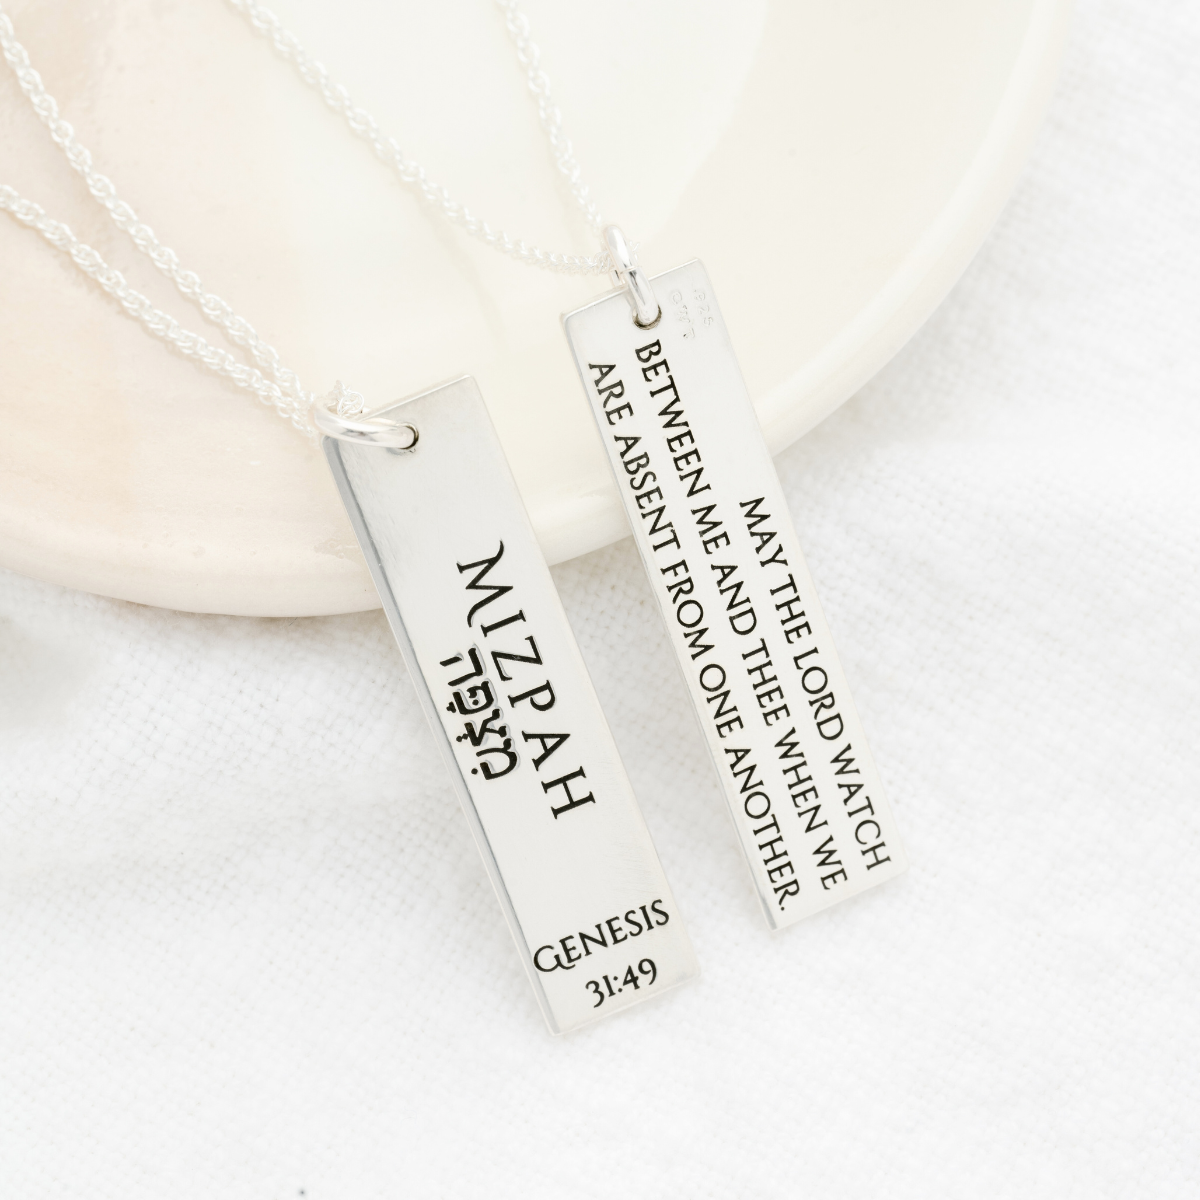 17 Heartfelt Mother Daughter Jewelry Gifts - Brilliant Earth Blog